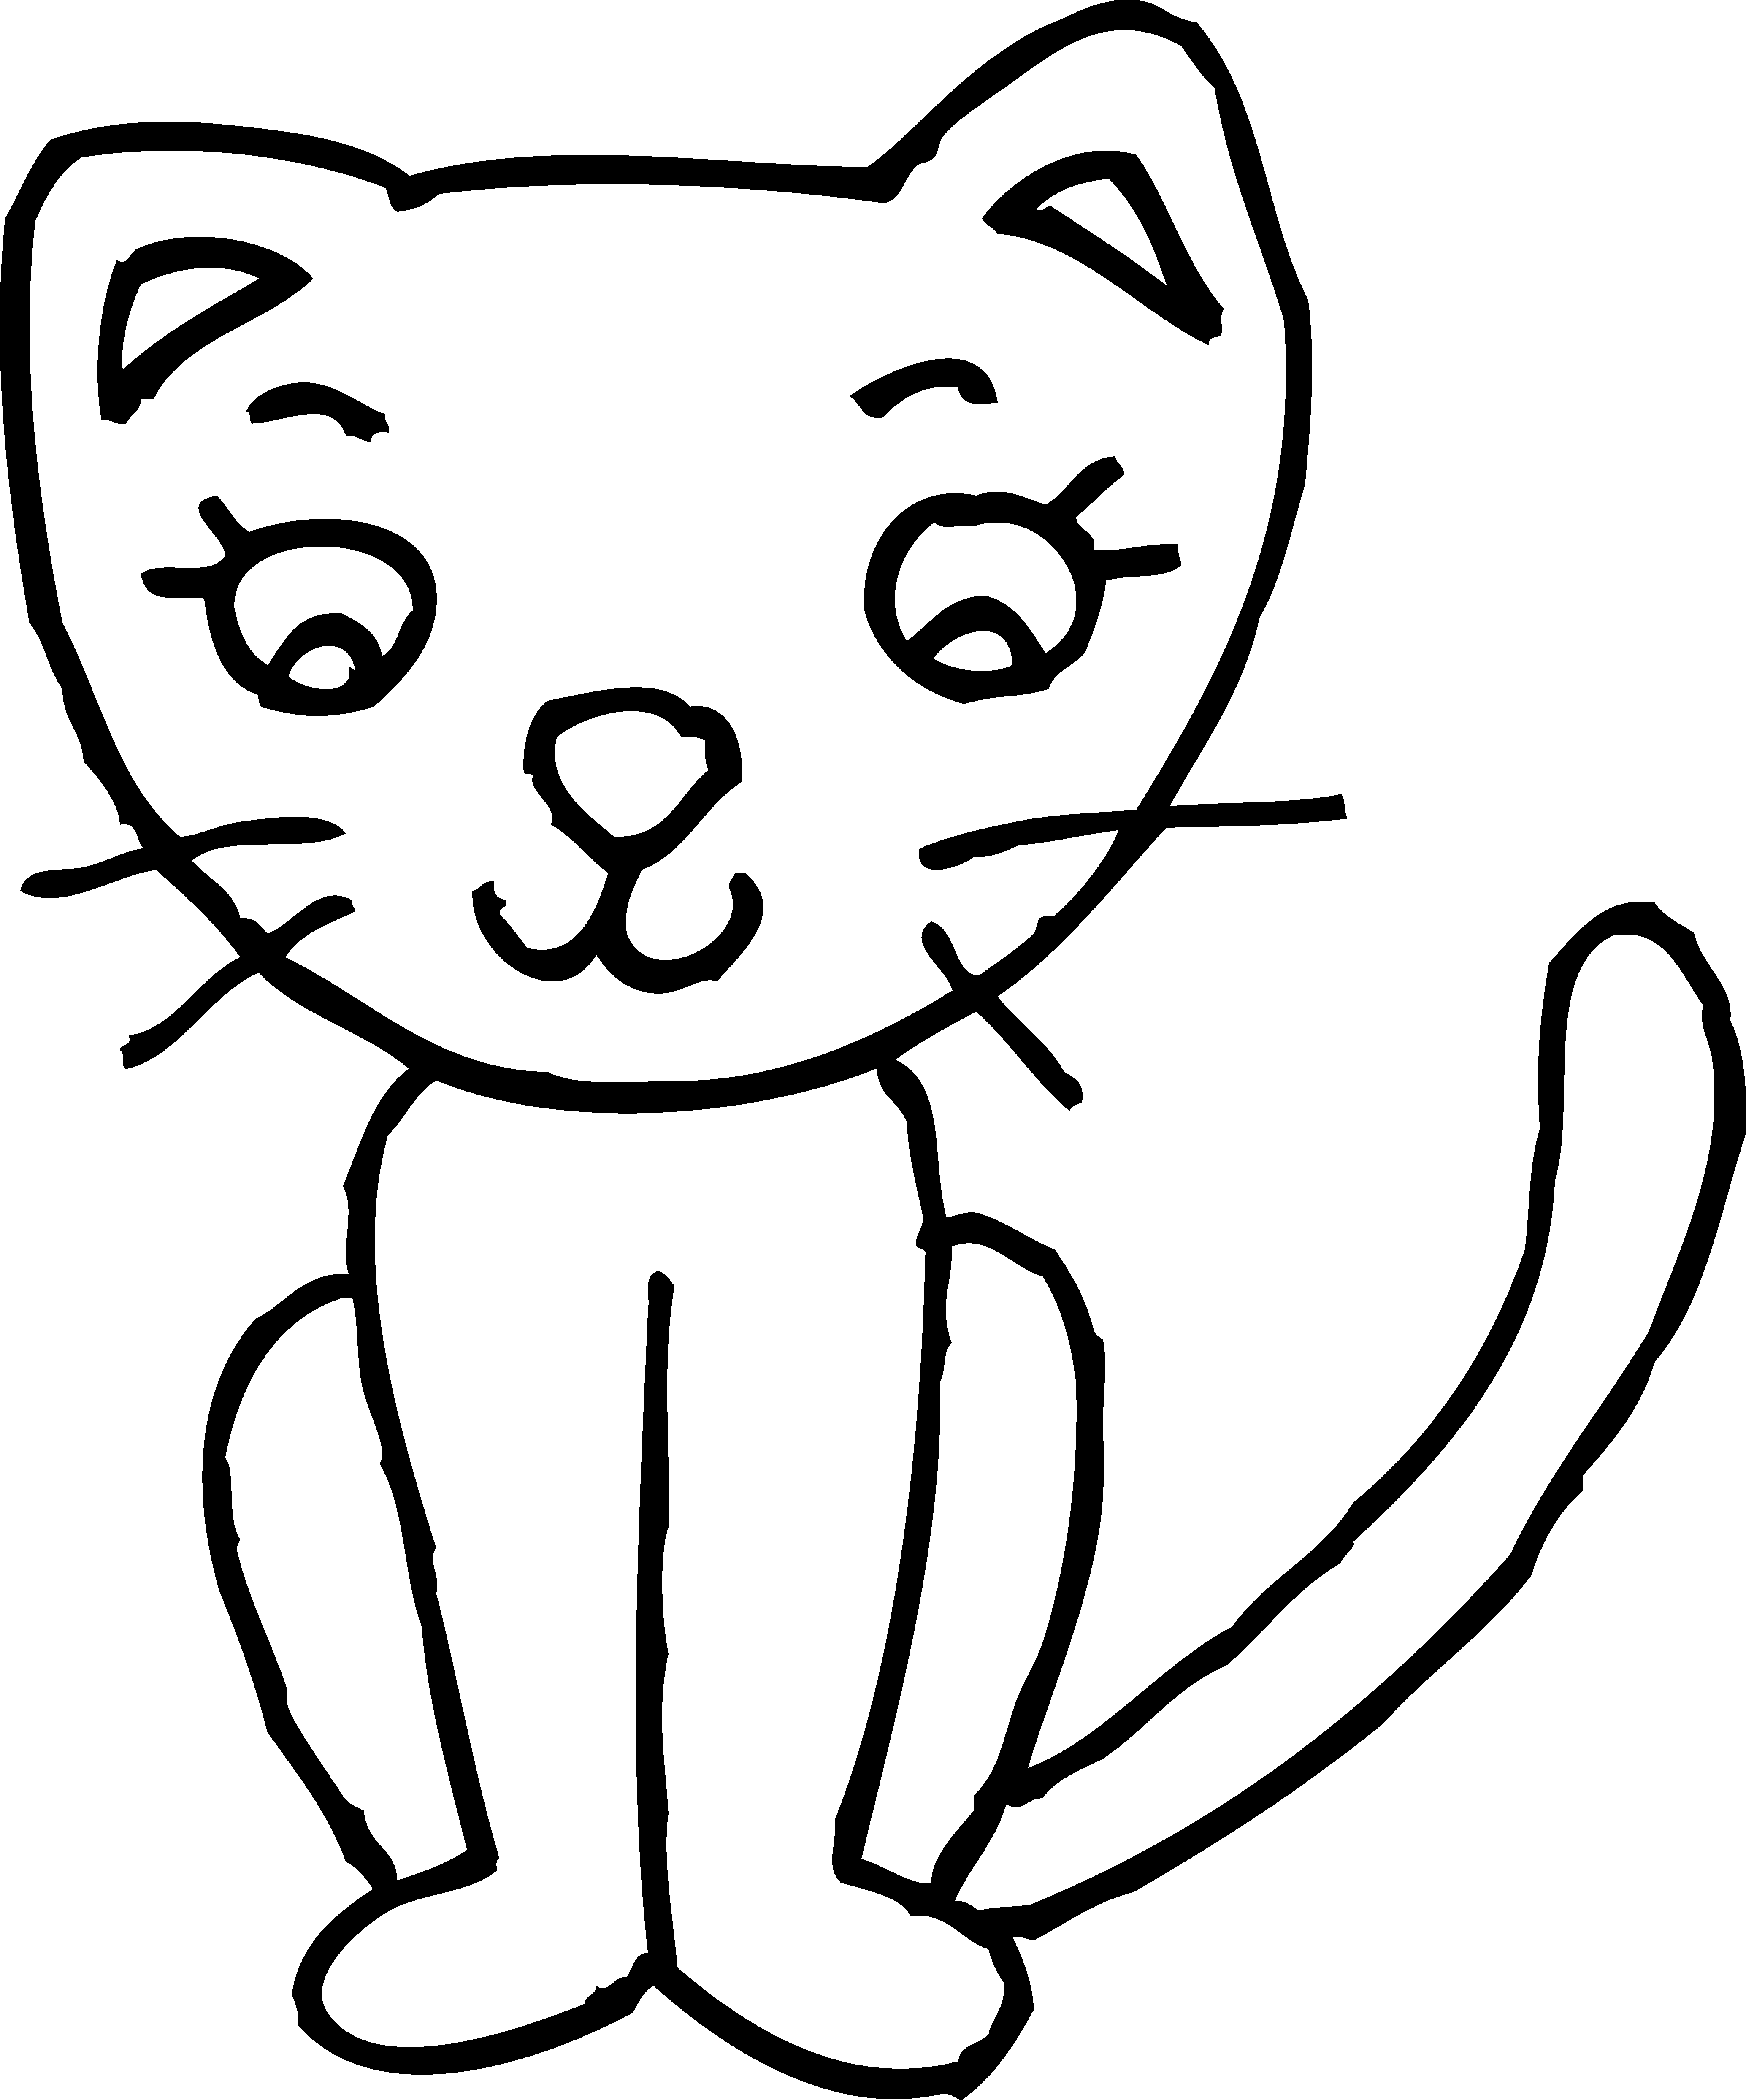 Yawn Clipart Black And White | Clipart Panda - Free Clipart Images